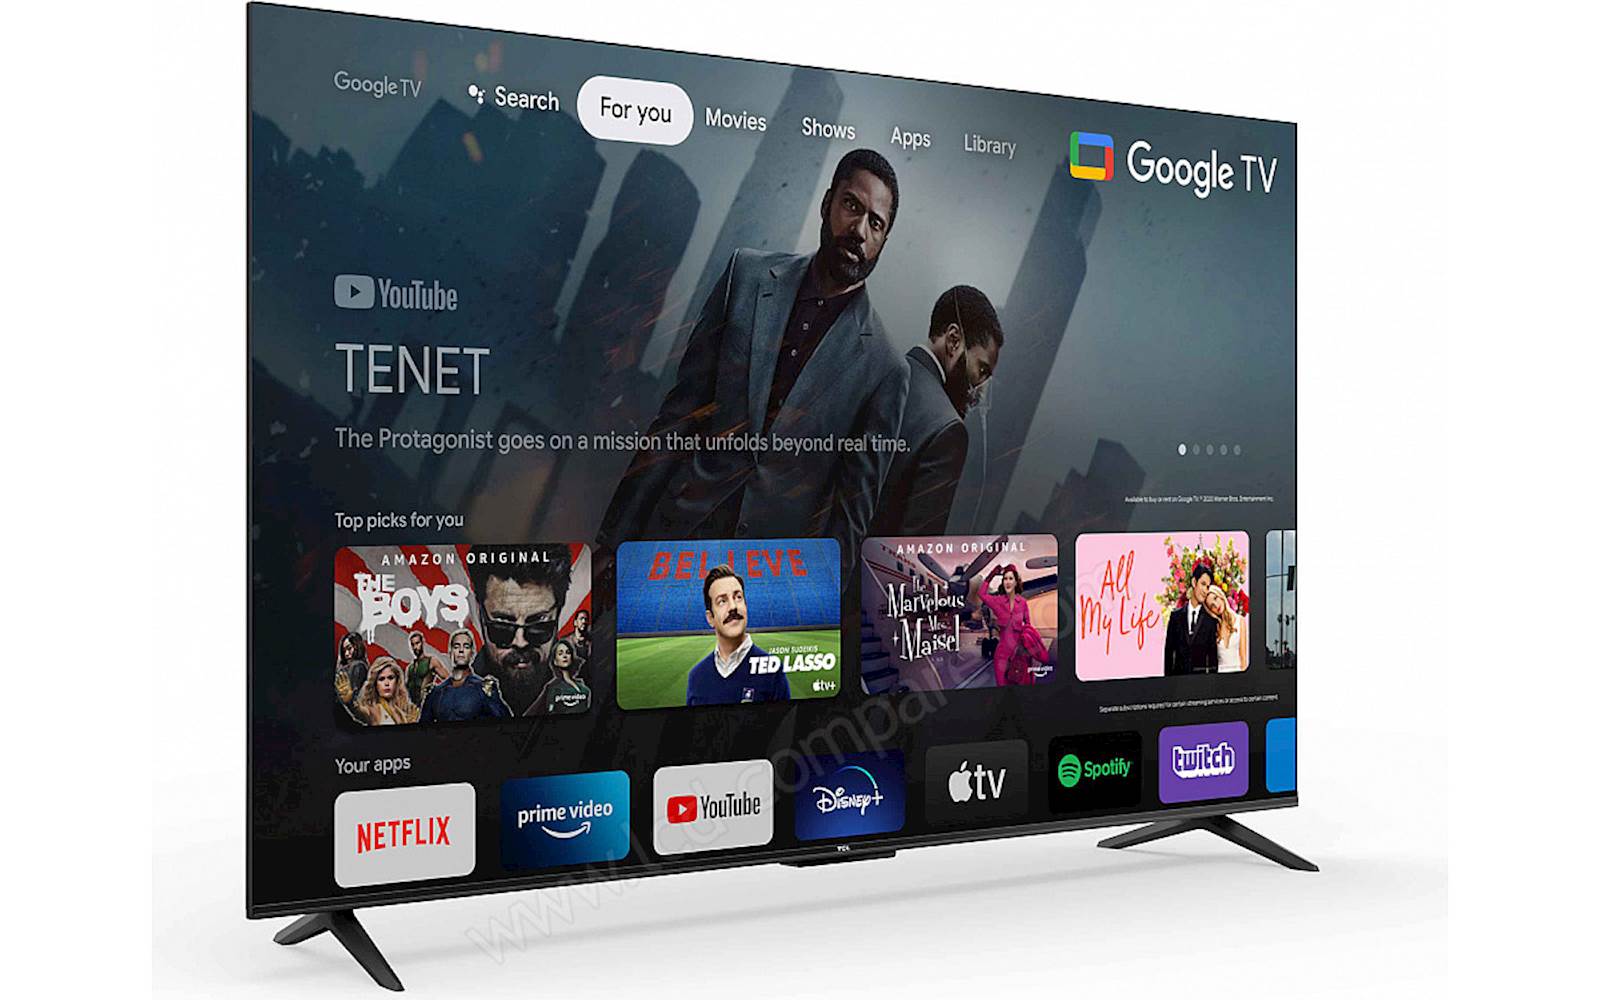 TV TCL 43P631 Android